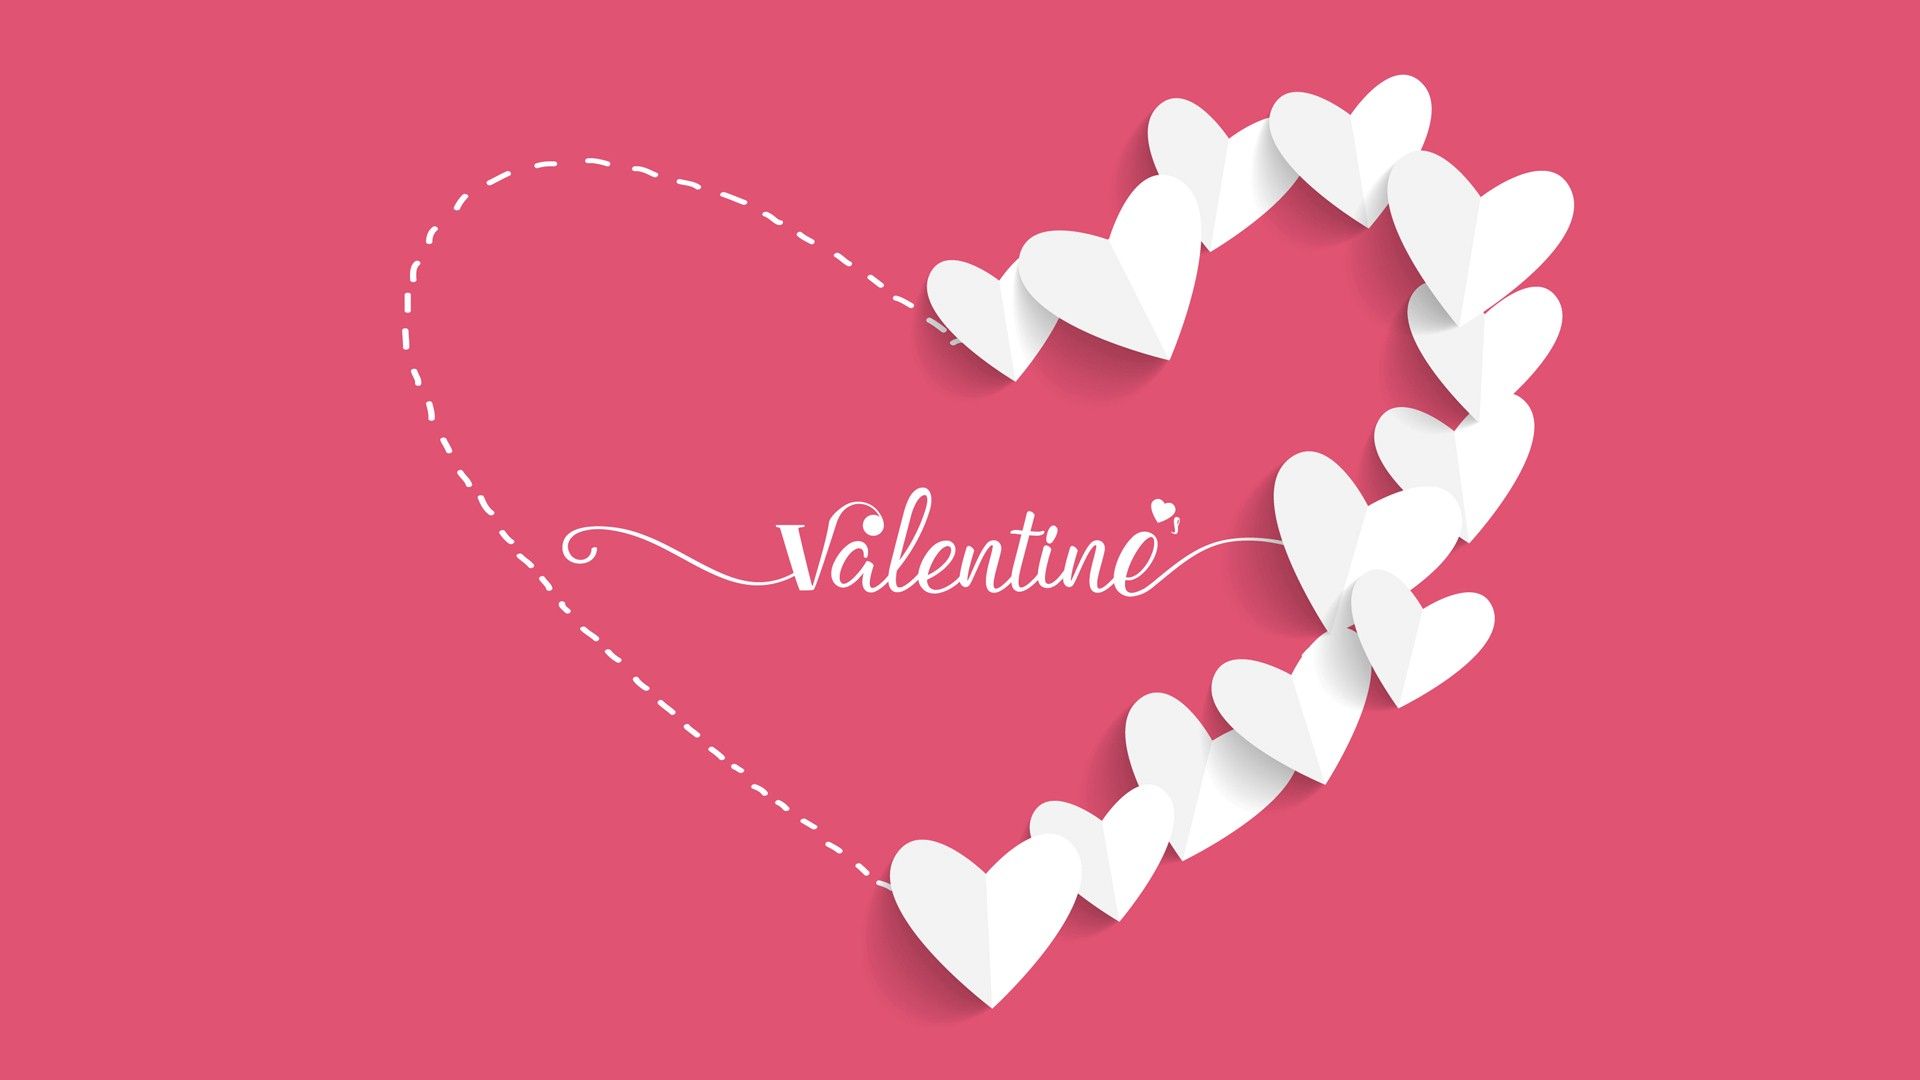 60+ Cute and Aesthetic Valentine's Day Wallpapers - College Fashion